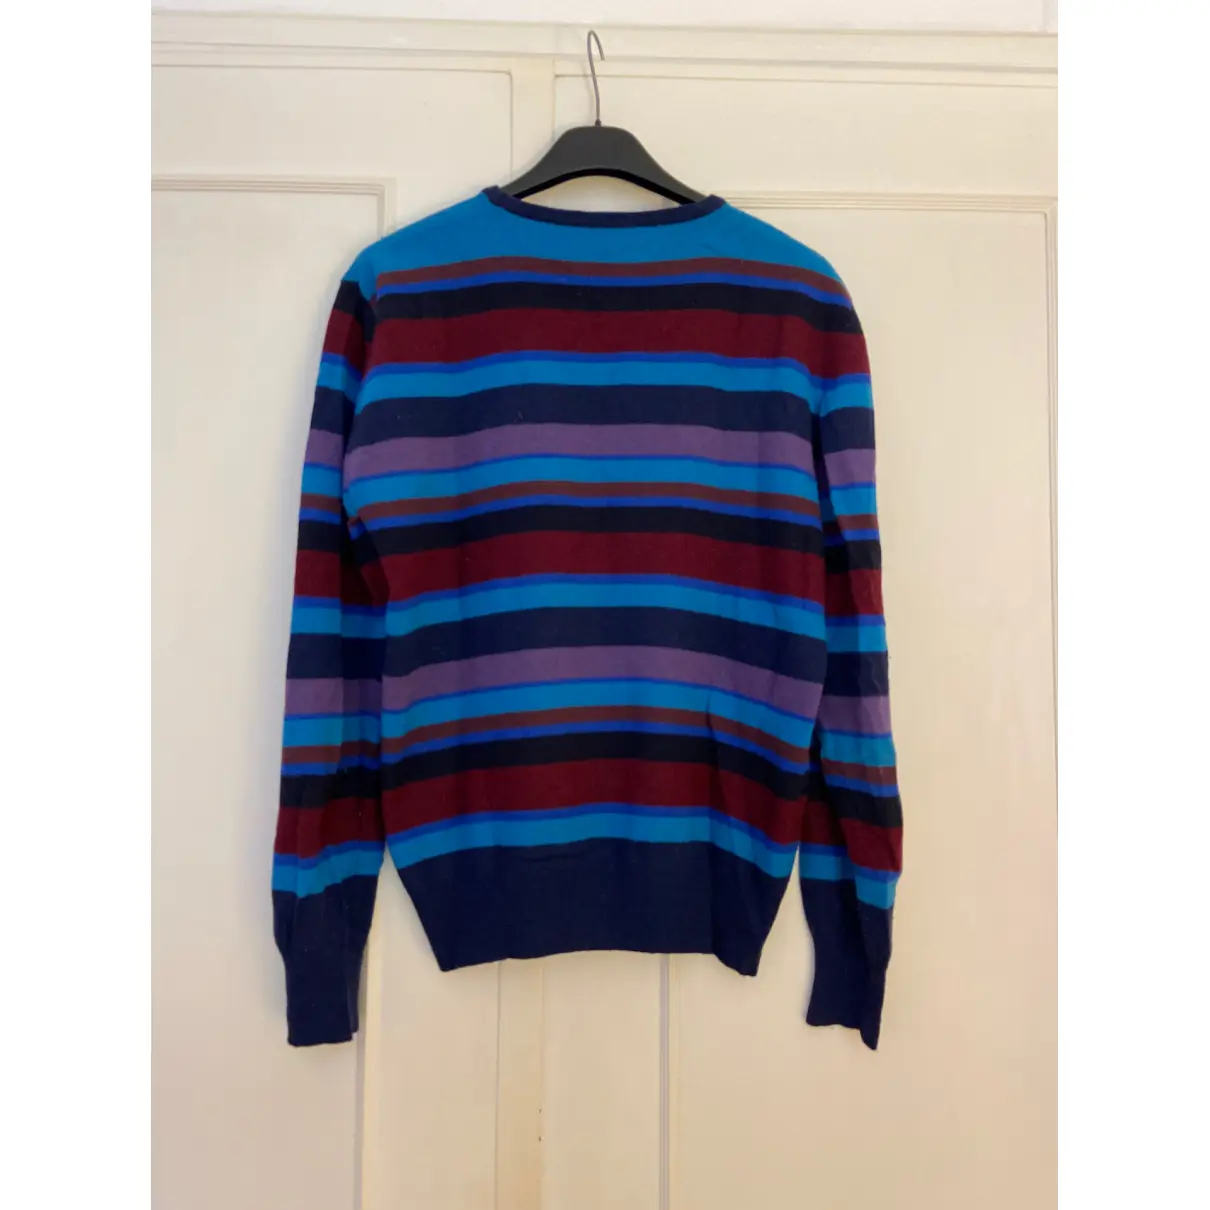 Buy GALLO Cashmere pull online